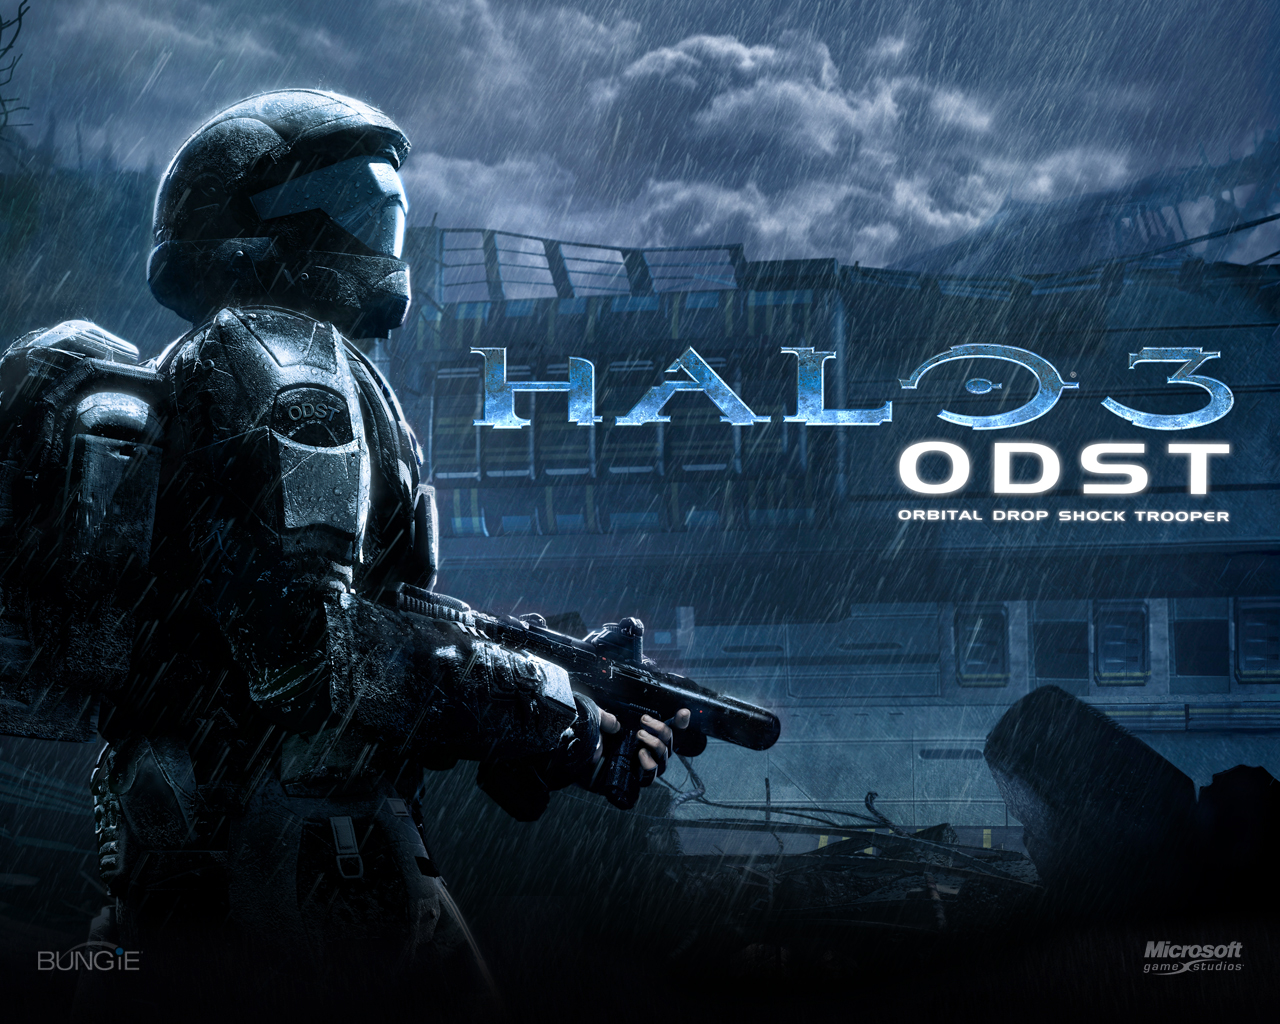 Halo 3 Odst HD Wallpapers | Backgrounds